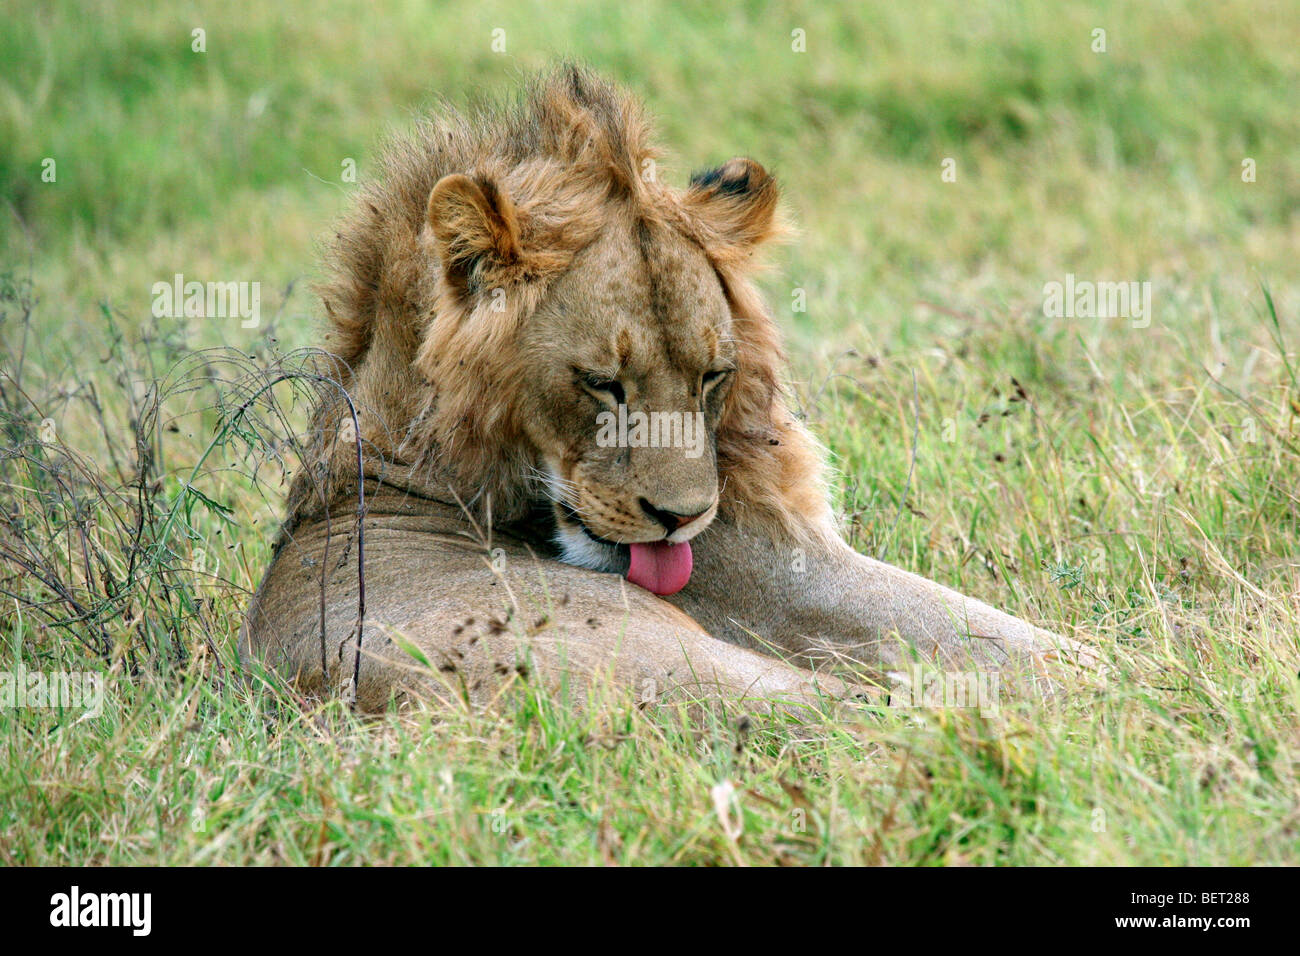 Male lion (Panthera leo) grooming by licking its fur, Ngorongoro crater, Tanzania, East Africa Stock Photo